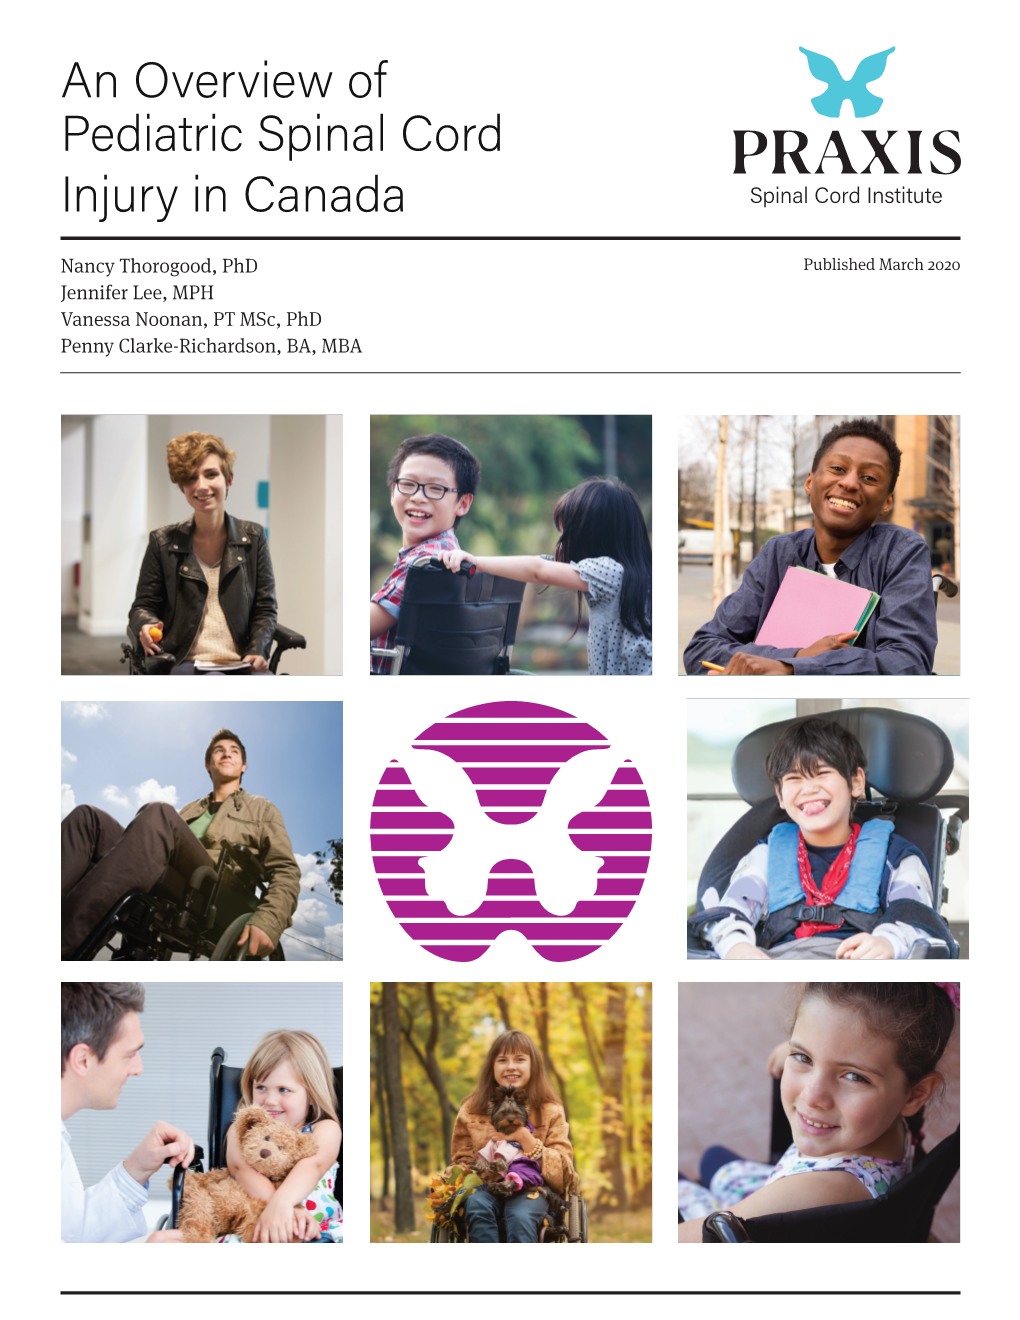 An Overview of Pediatric Spinal Cord Injury in Canada